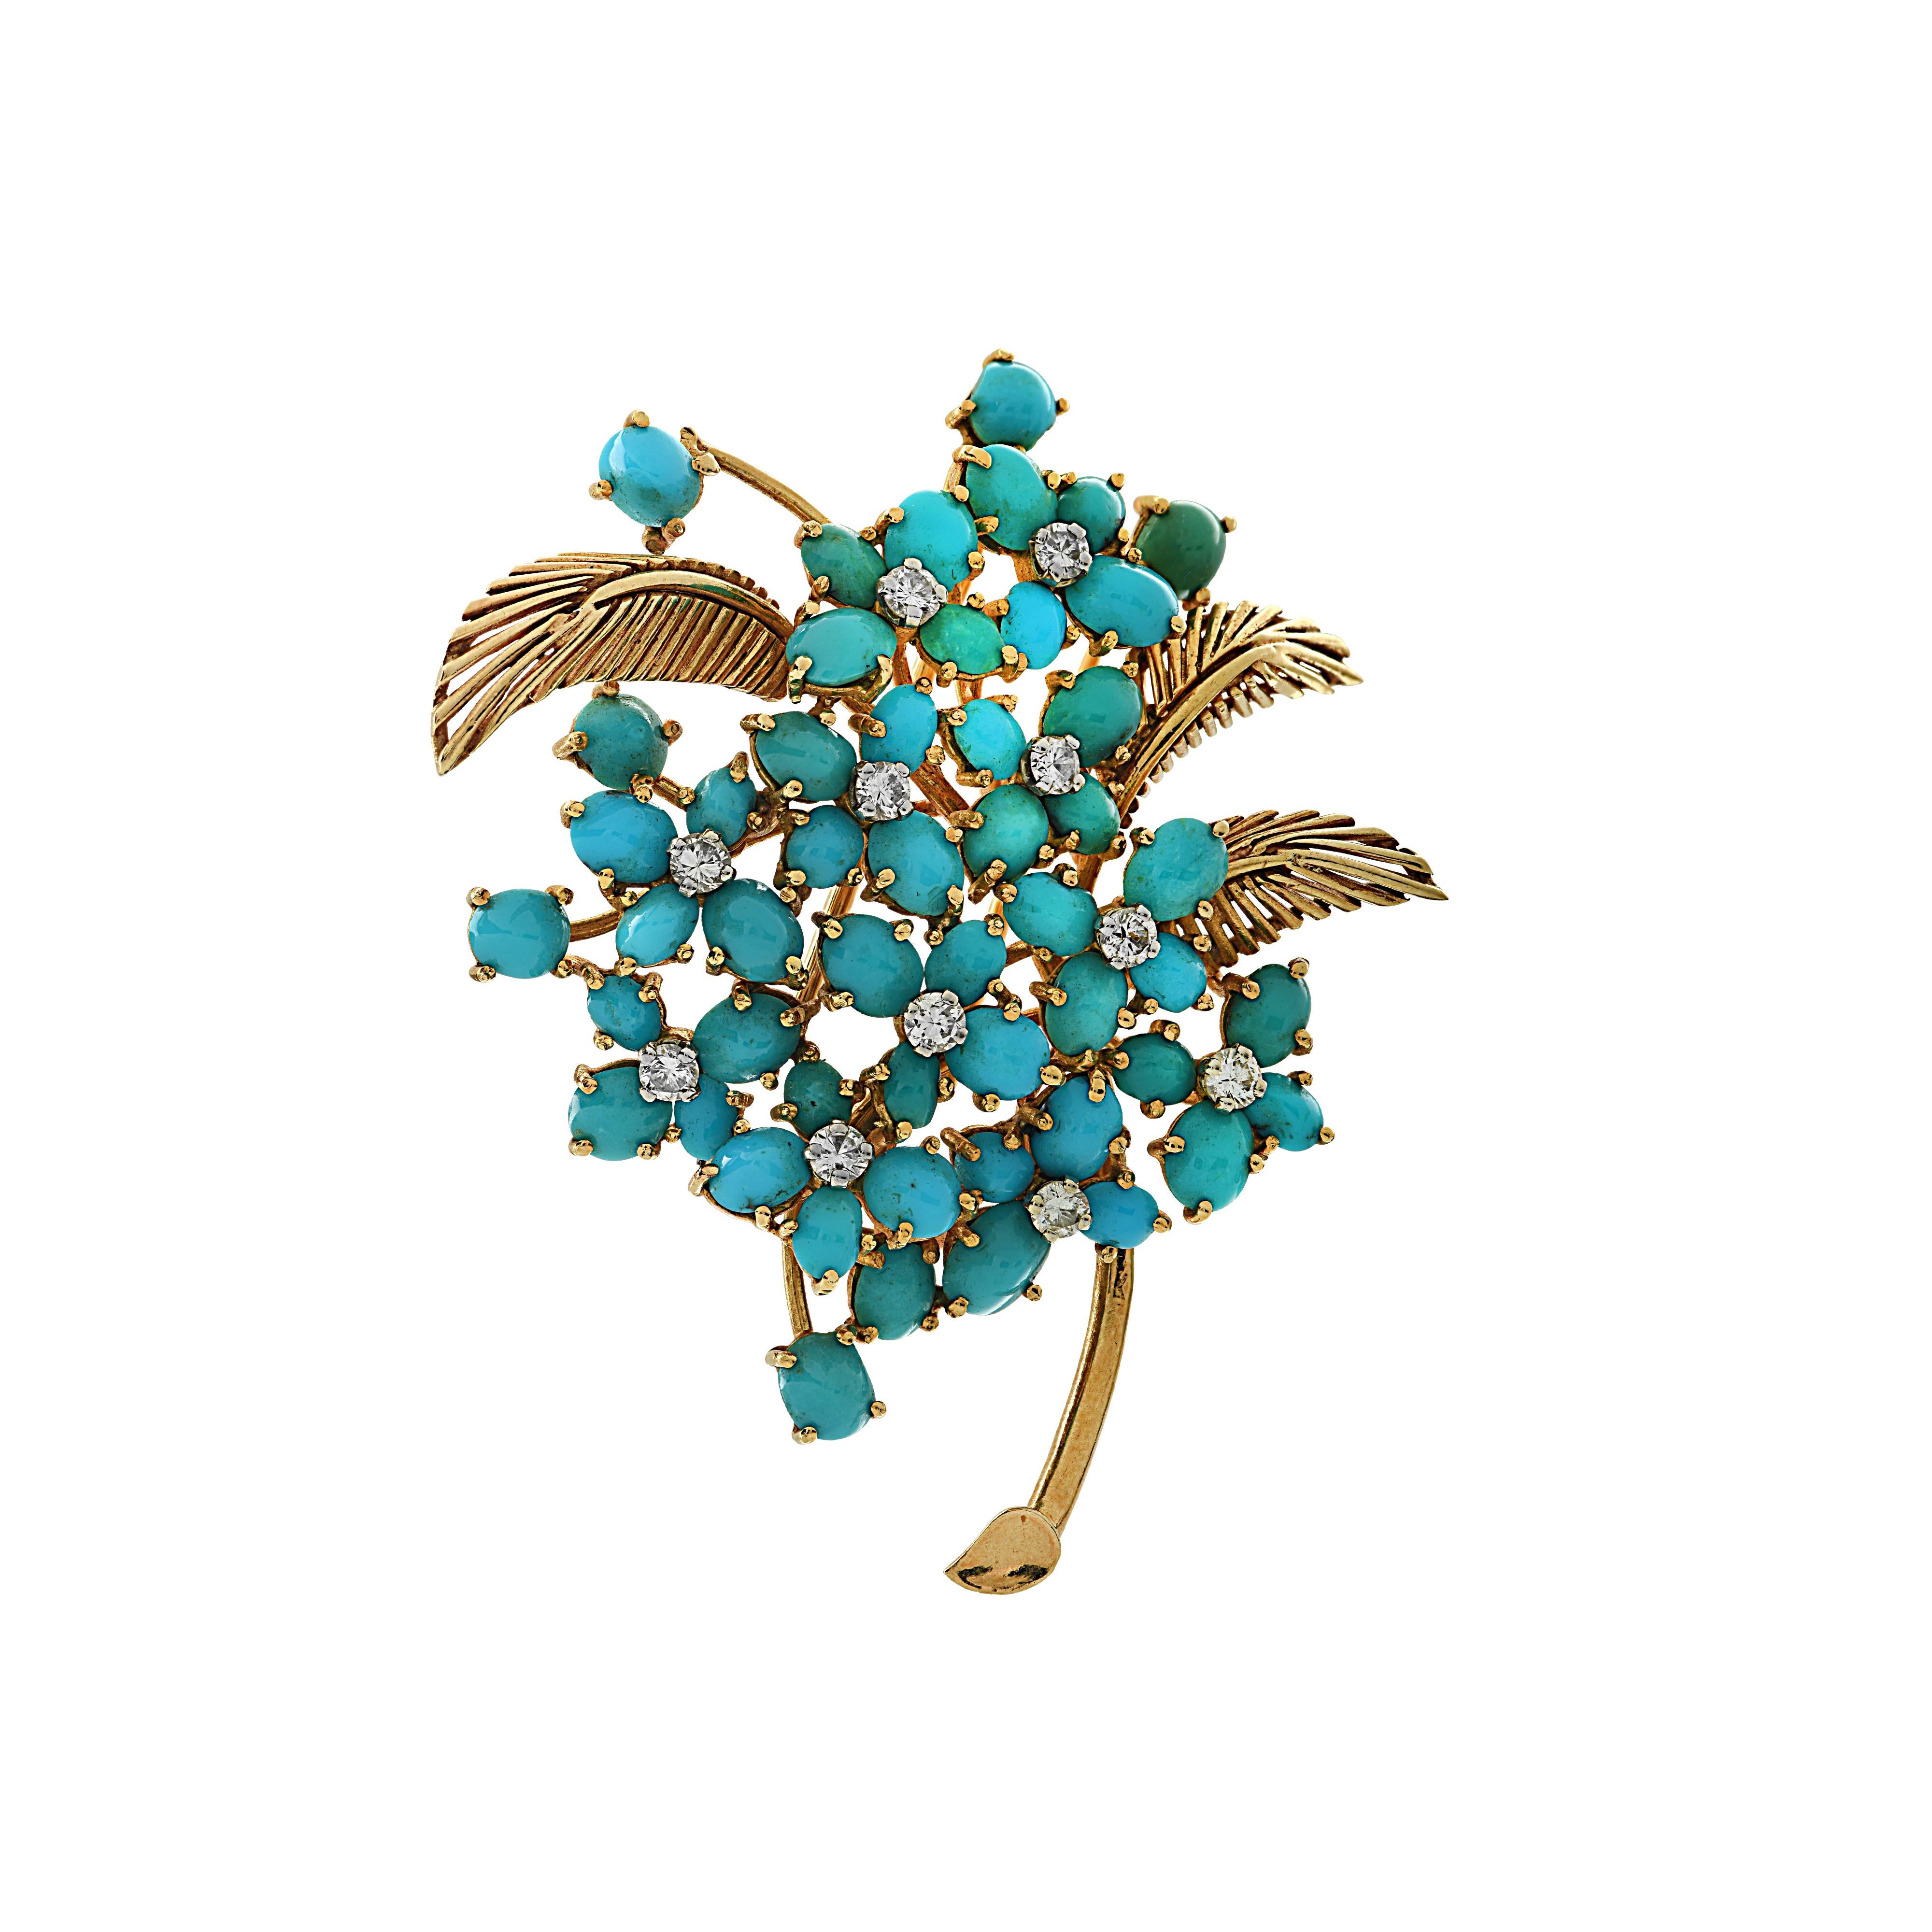 Ornate French brooch pin crafted in 18 karat yellow gold, featuring turquoise cabochons arranged in flower clusters, detailed with 11 round brilliant cut diamonds weighing approximately .35 carats total, G color, VS-SI clarity.  This delightful